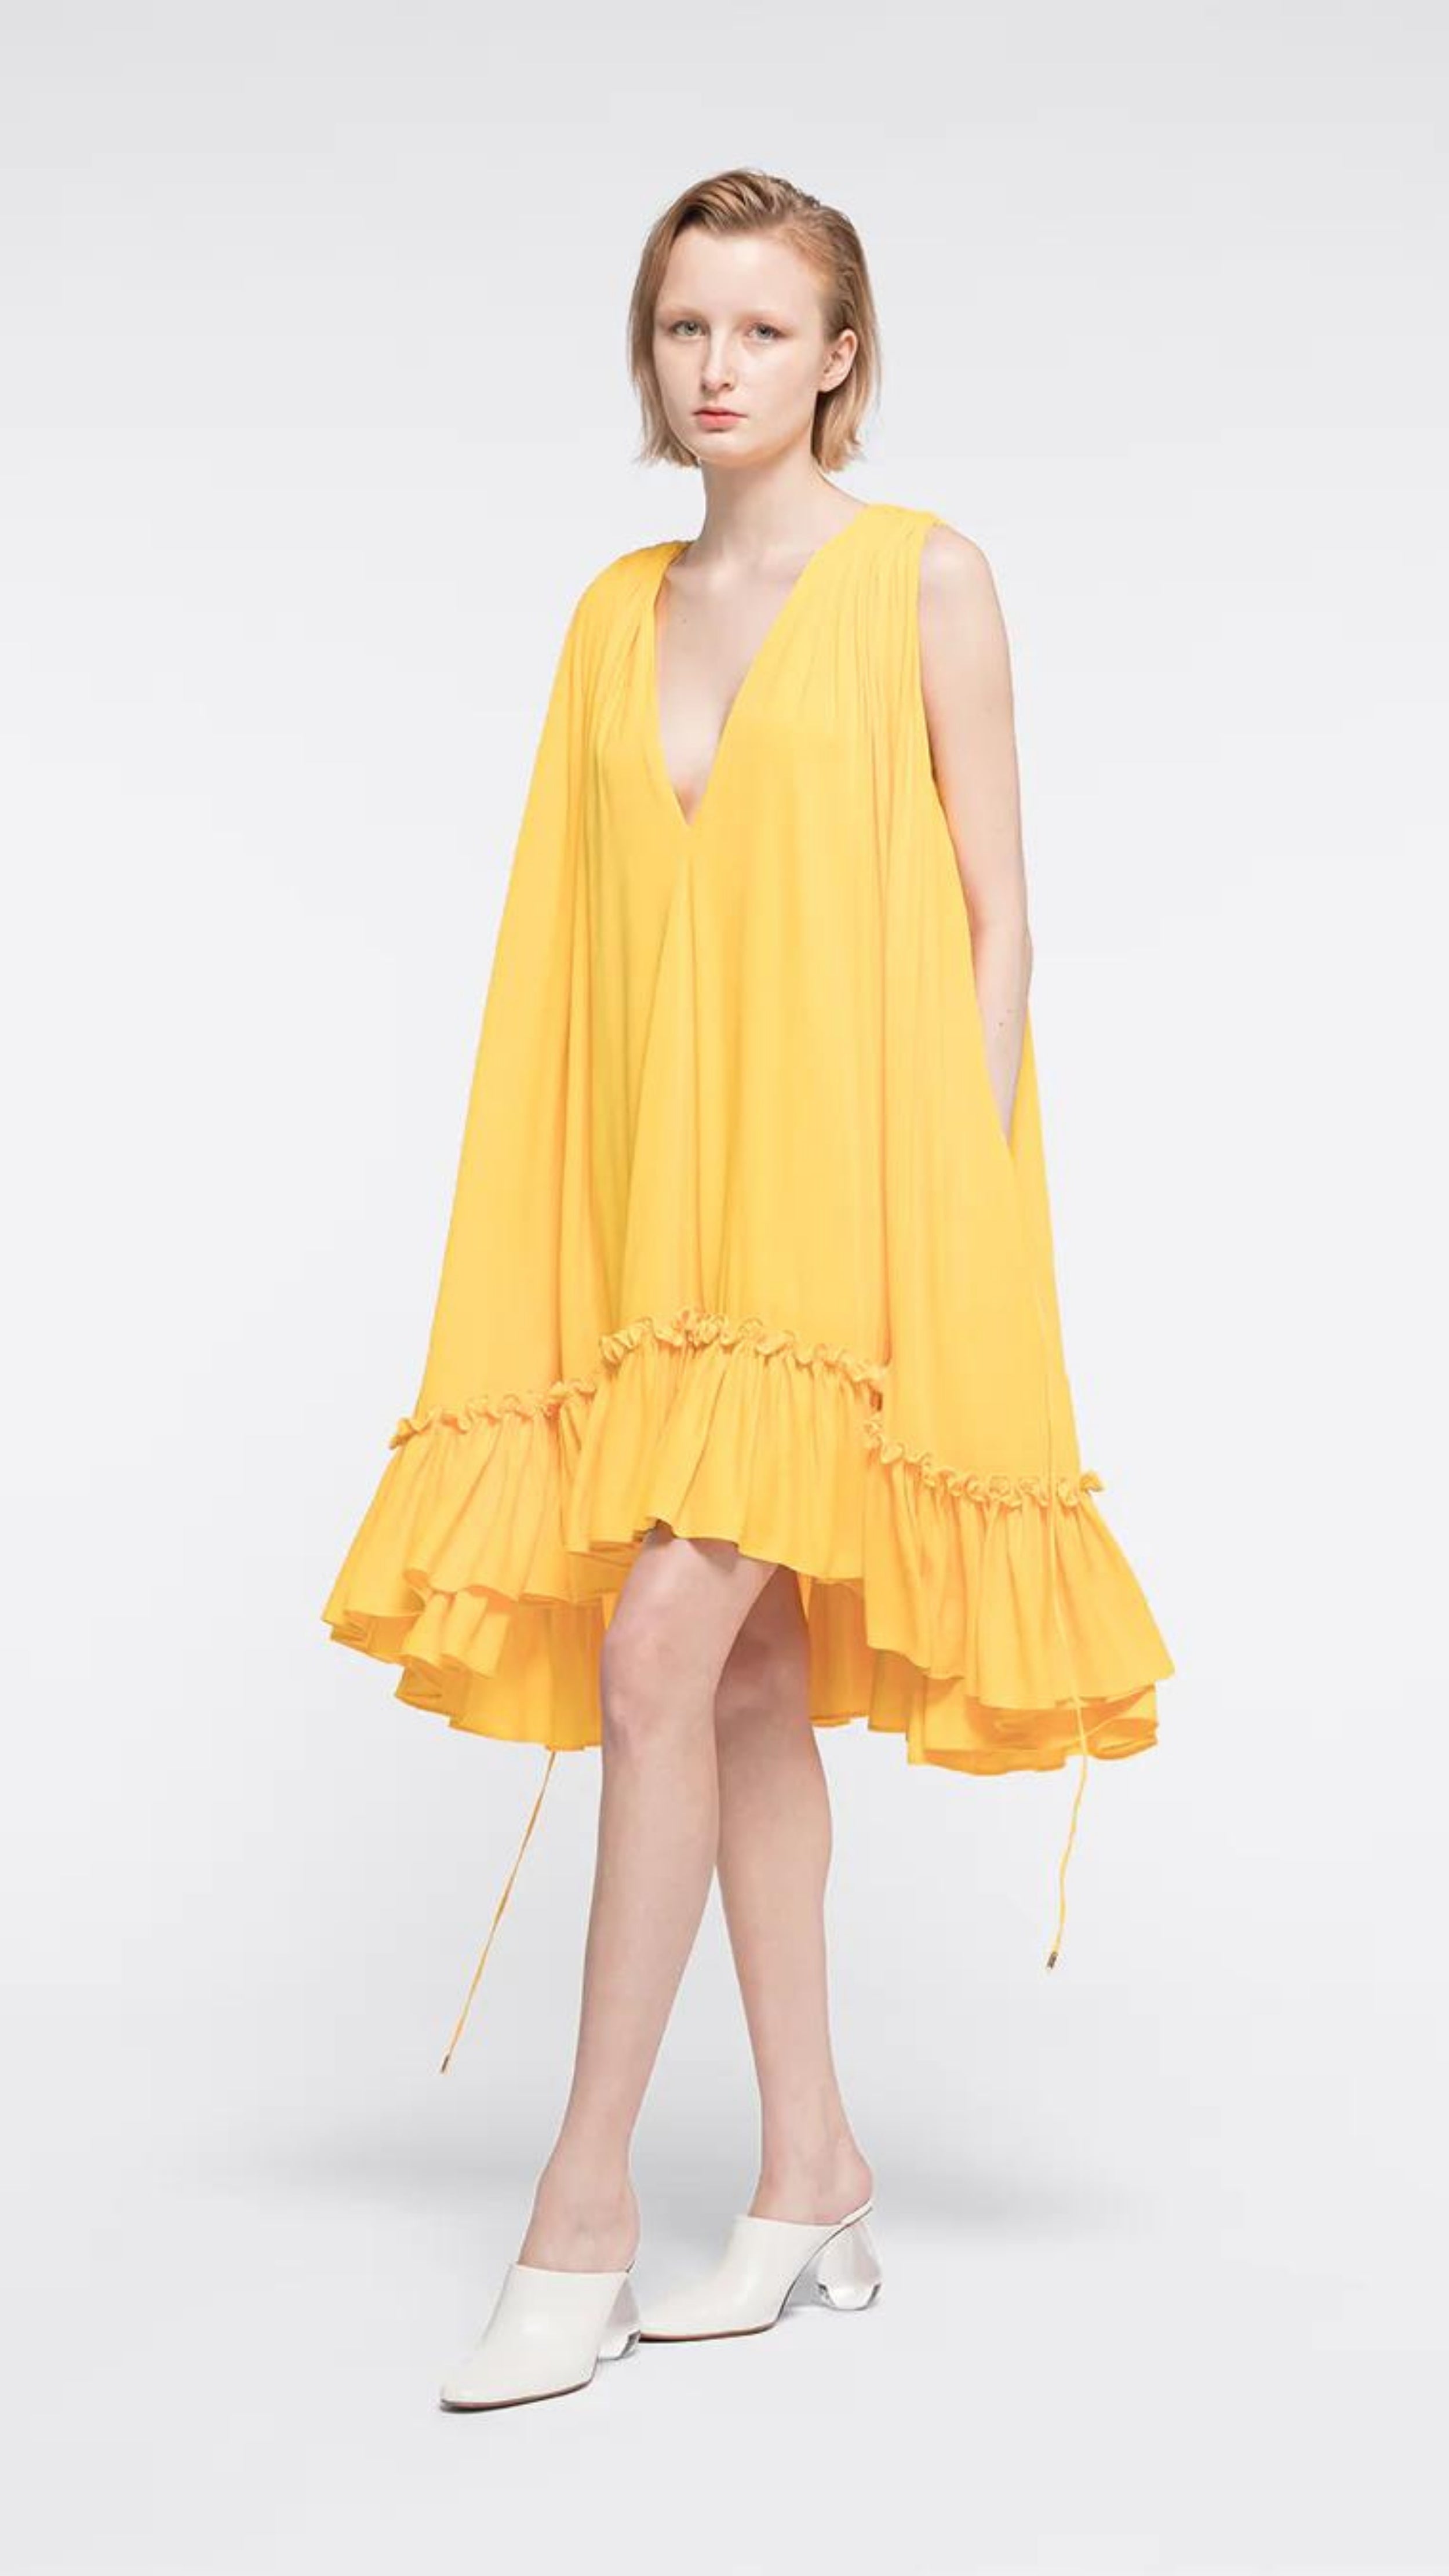 Az Factory Lutz Huelle Marilyn Dress. Bright yellow summer dress in trapeze style. With a v neck and volumnous a-line body and ruffled bottom. Shown on model facing front.